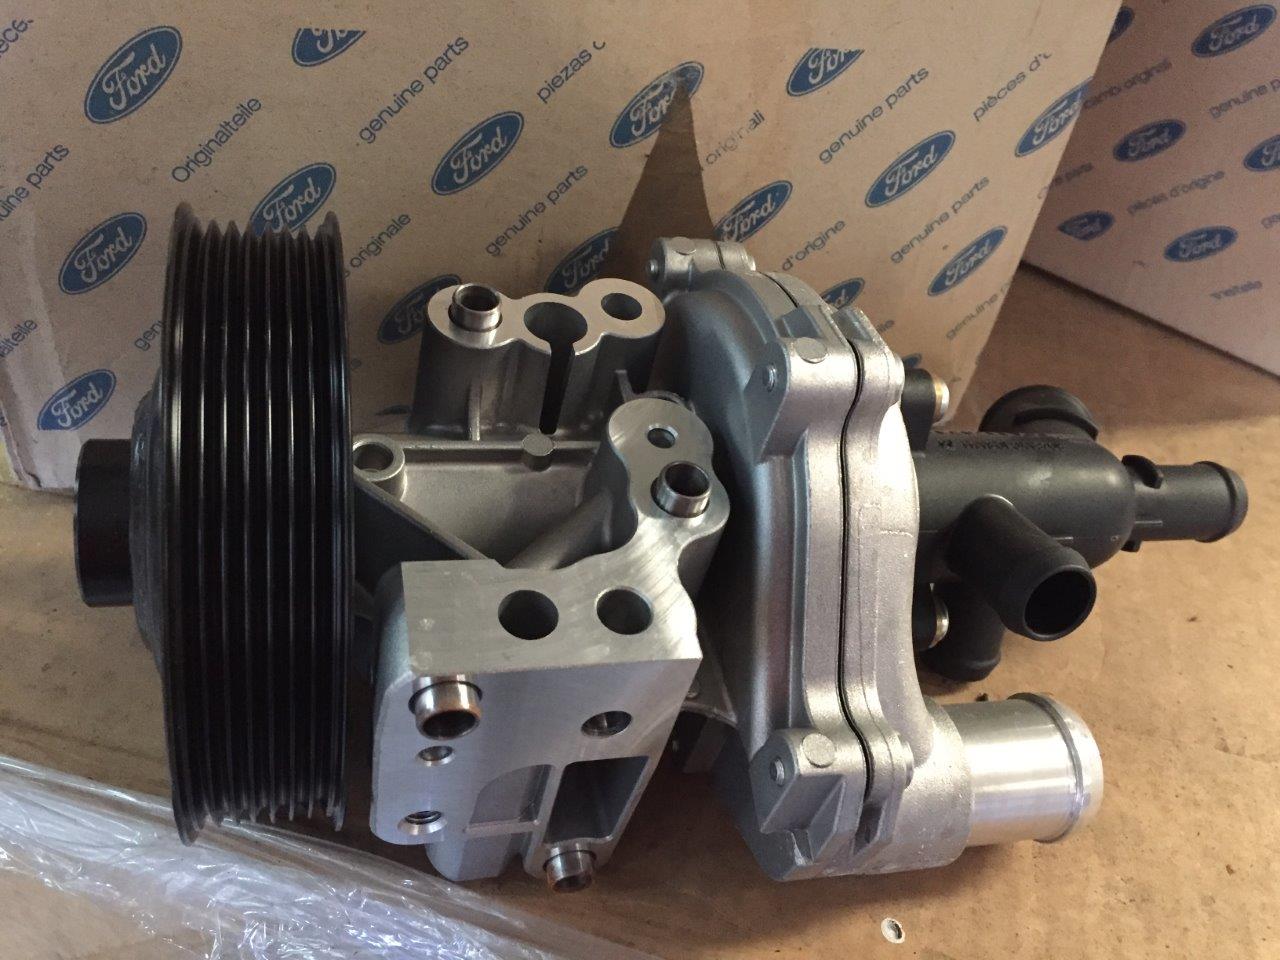 Hagglunds BV206 Parts - Ford TD Water Pump Asembly